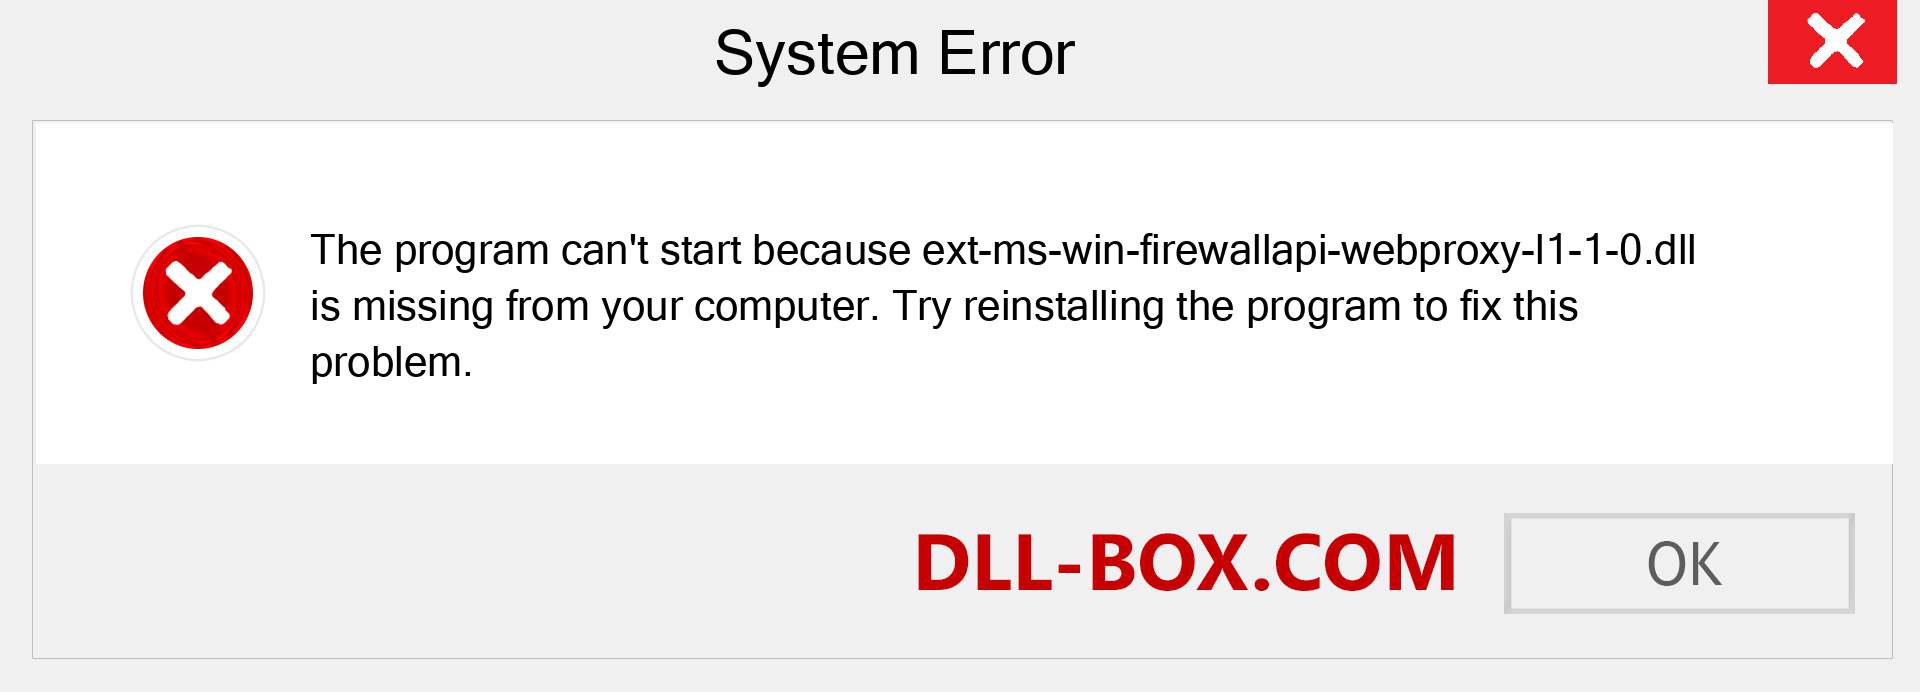  ext-ms-win-firewallapi-webproxy-l1-1-0.dll file is missing?. Download for Windows 7, 8, 10 - Fix  ext-ms-win-firewallapi-webproxy-l1-1-0 dll Missing Error on Windows, photos, images